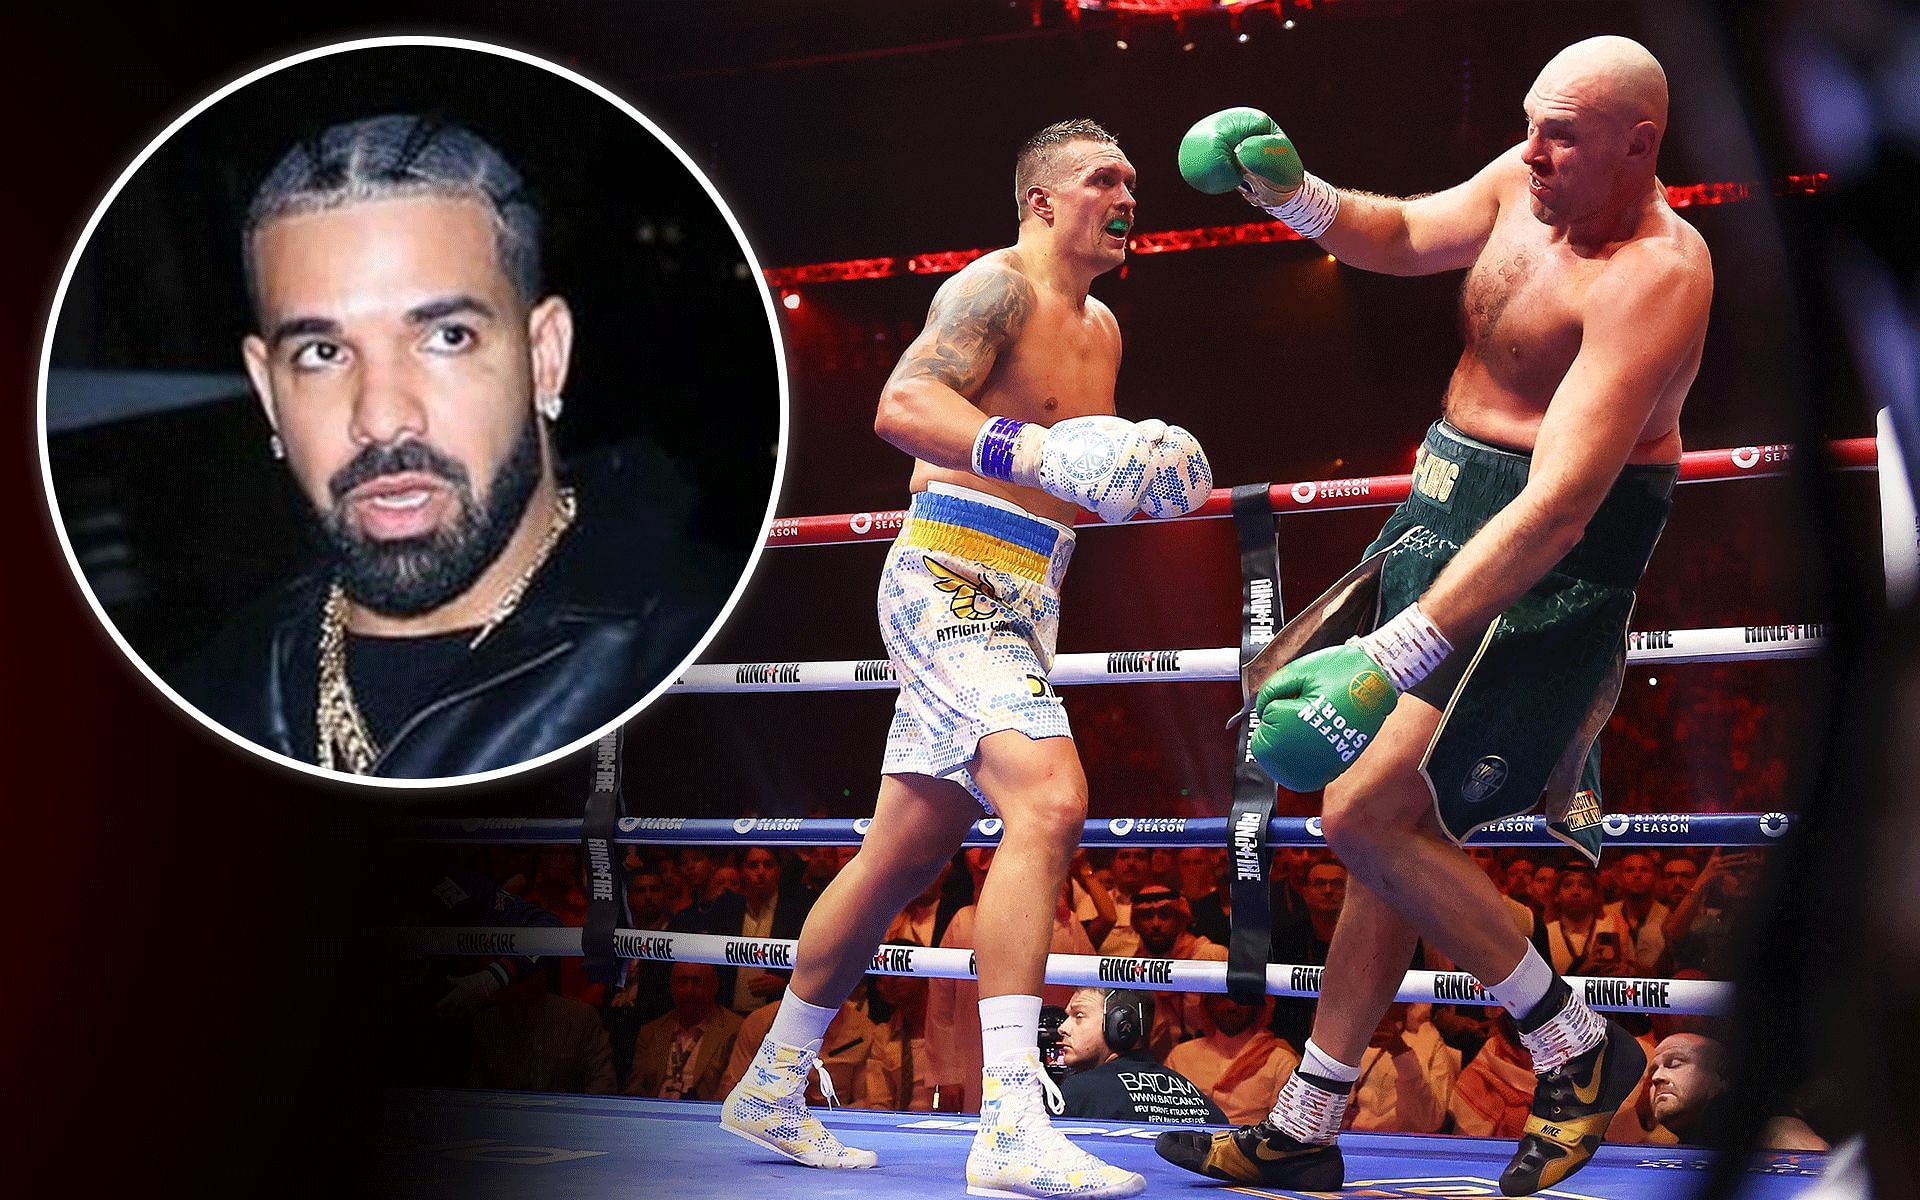 Drake (left) lost a six-figure bet on Tyson Fury vs. Oleksandr Usyk fight [Images Courtesy: @champagnepapi Instagram and Getty]